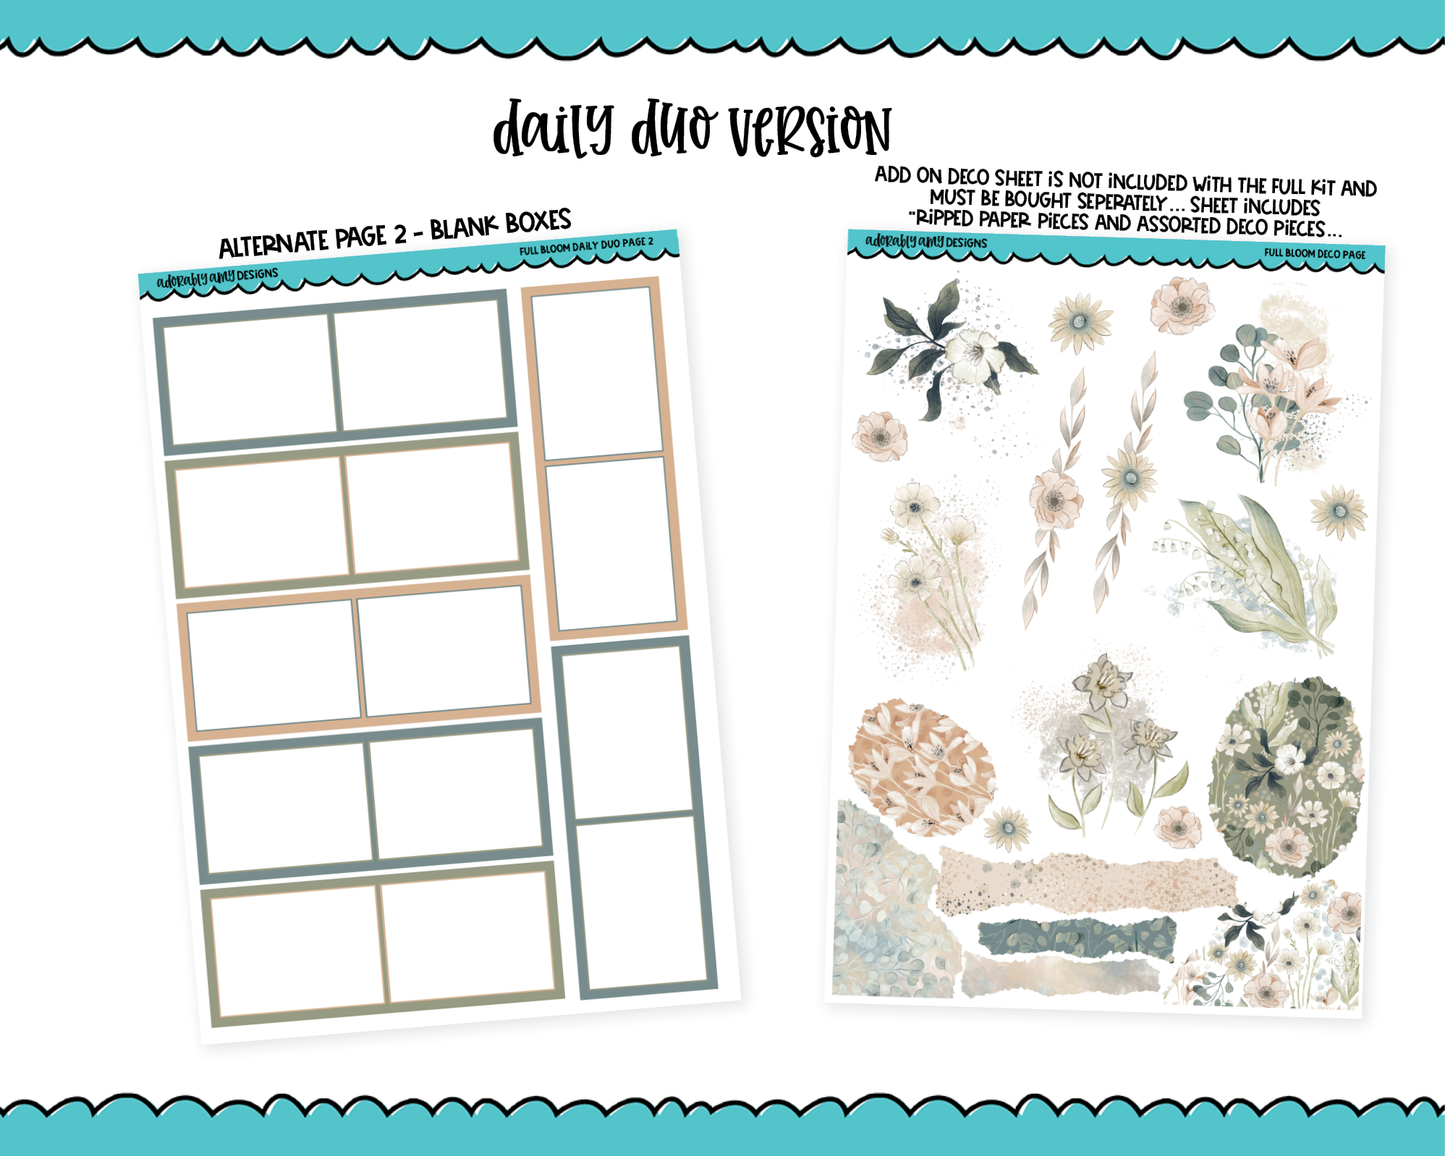 Daily Duo Full Bloom Themed Weekly Planner Sticker Kit for Daily Duo Planner